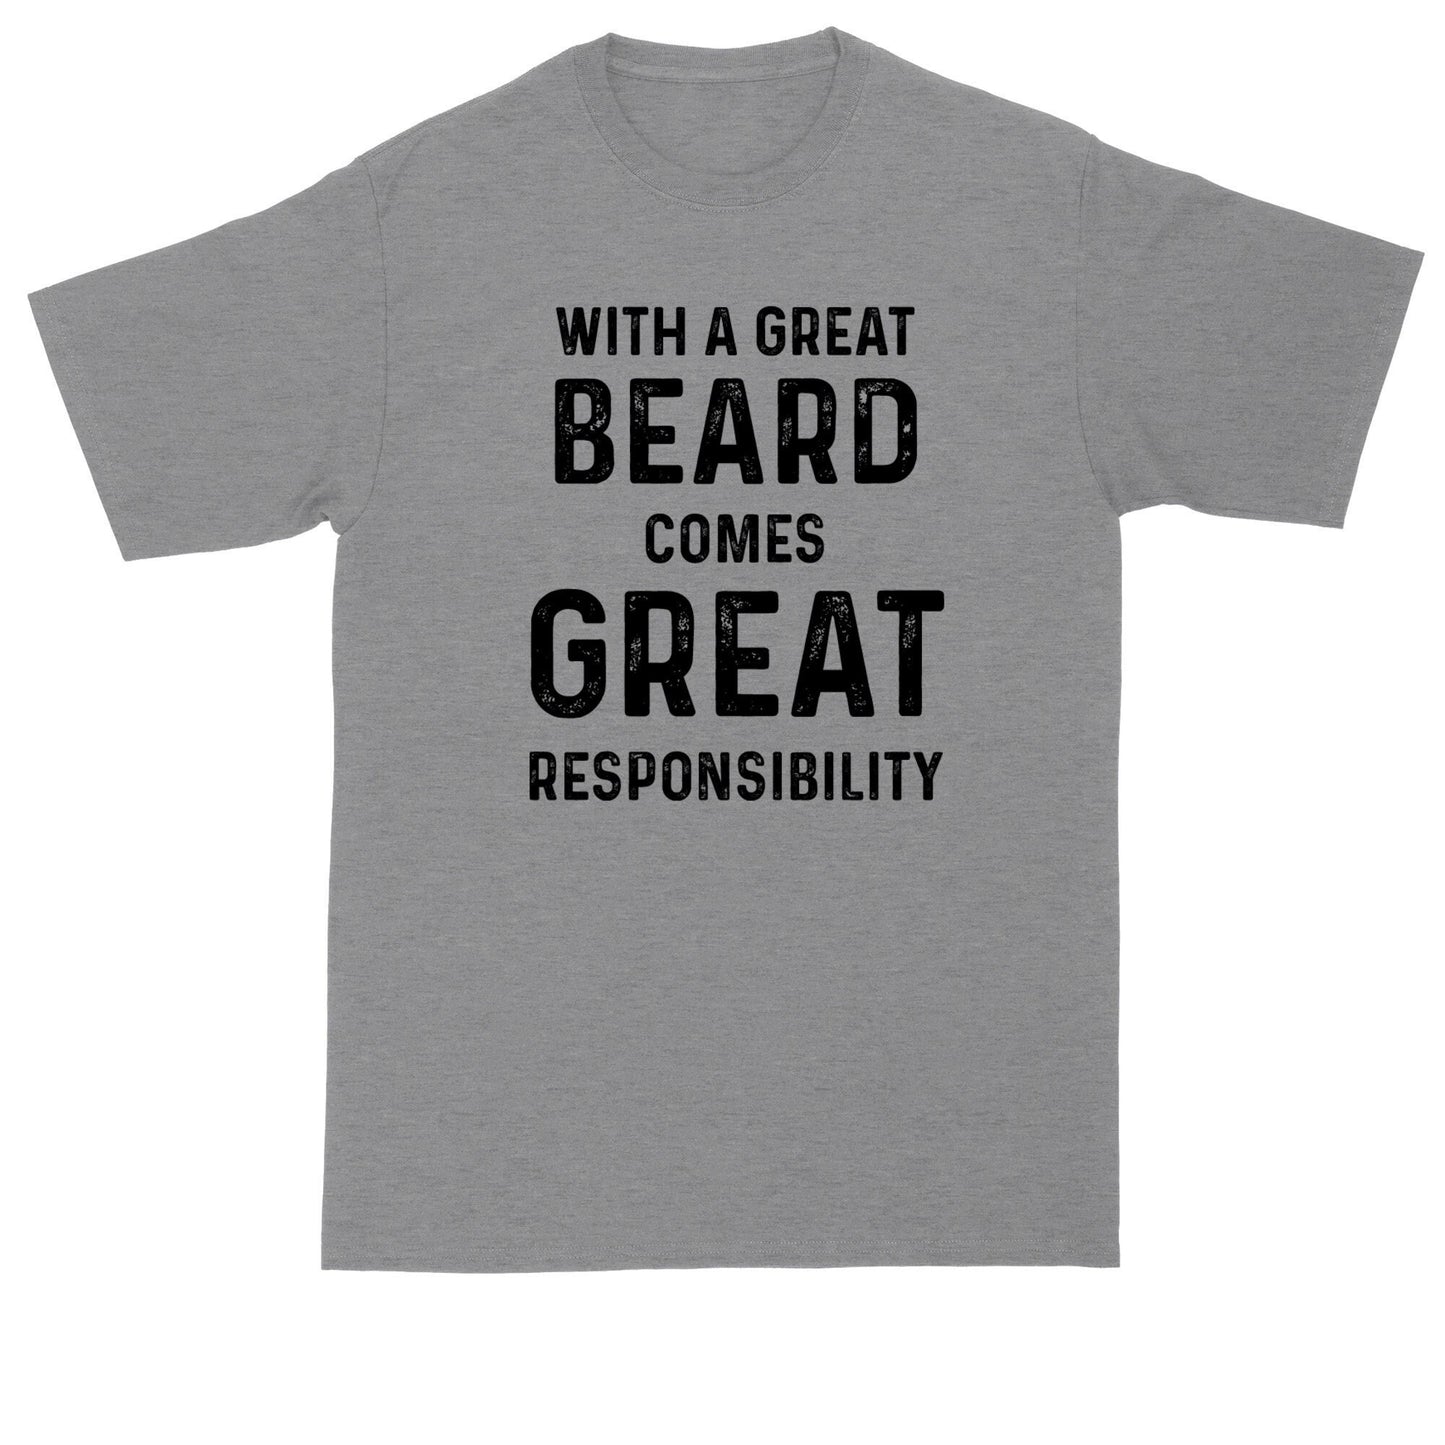 With a Great Beard Comes Great Responsibility| Mens Big & Tall T-Shirt | Funny Shirt | Fathers Day Gift | Bearded Dads | Beard Gift